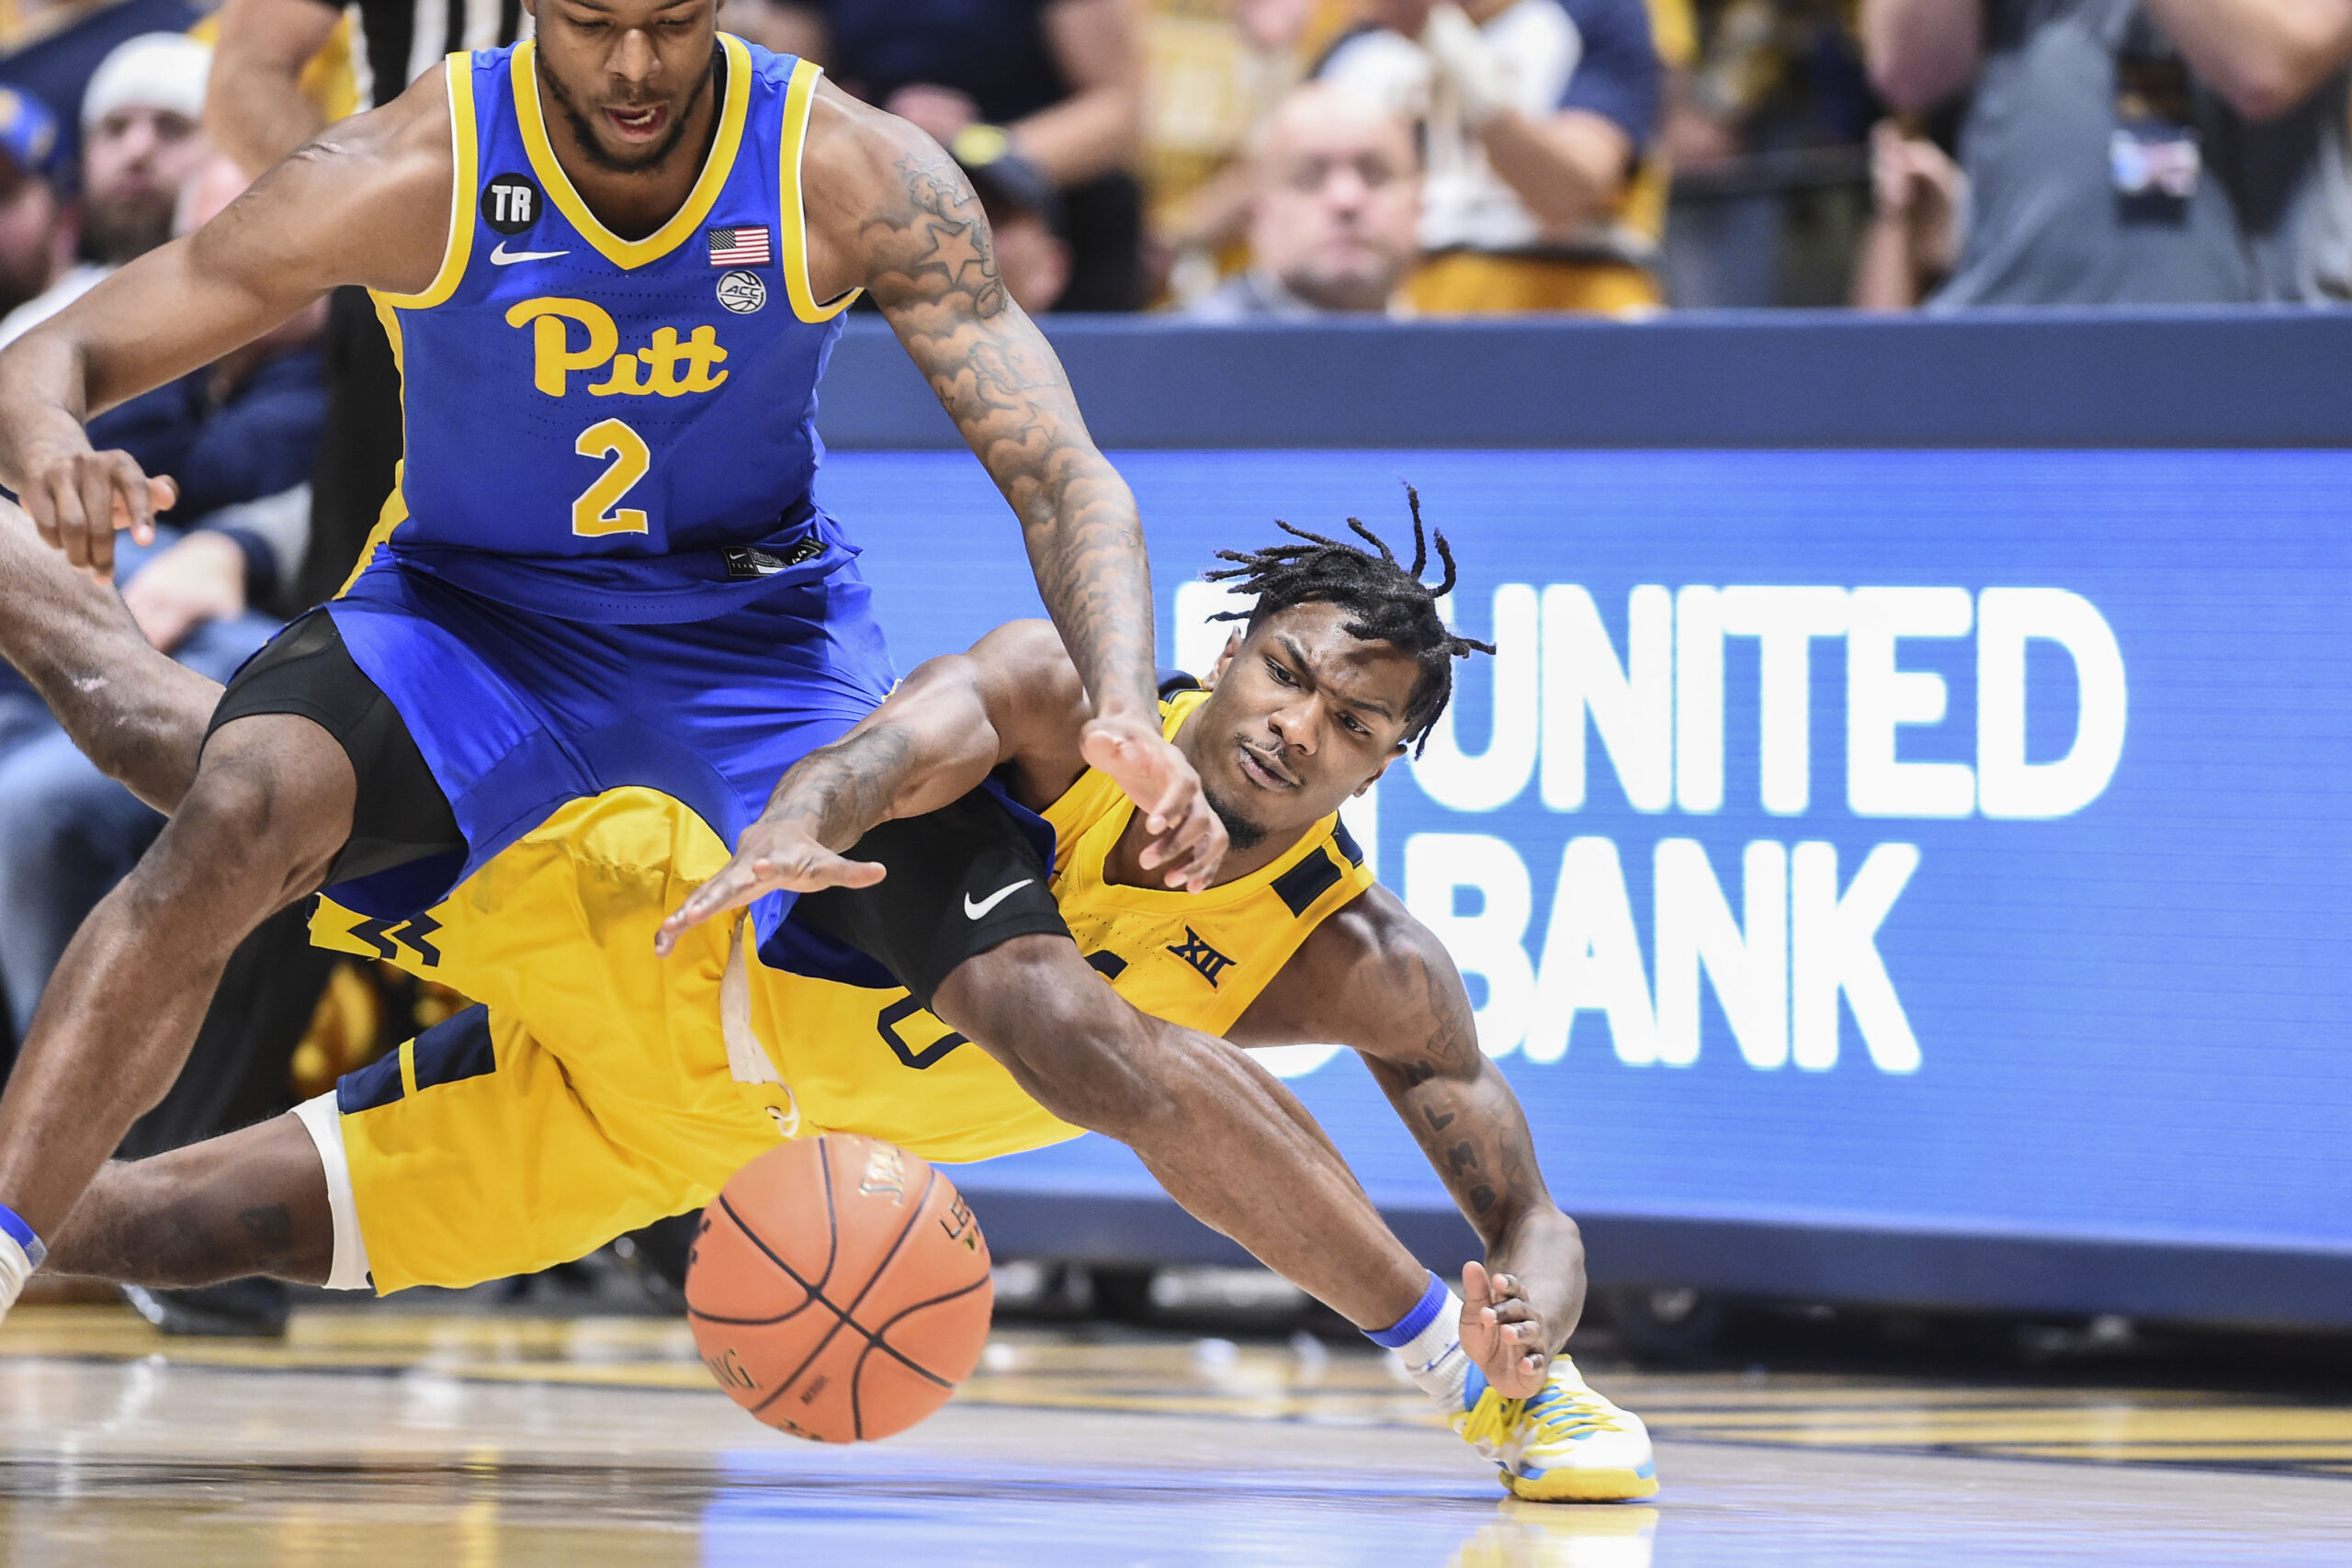 WVU, Pitt both in search of an identity with the Backyard Brawl